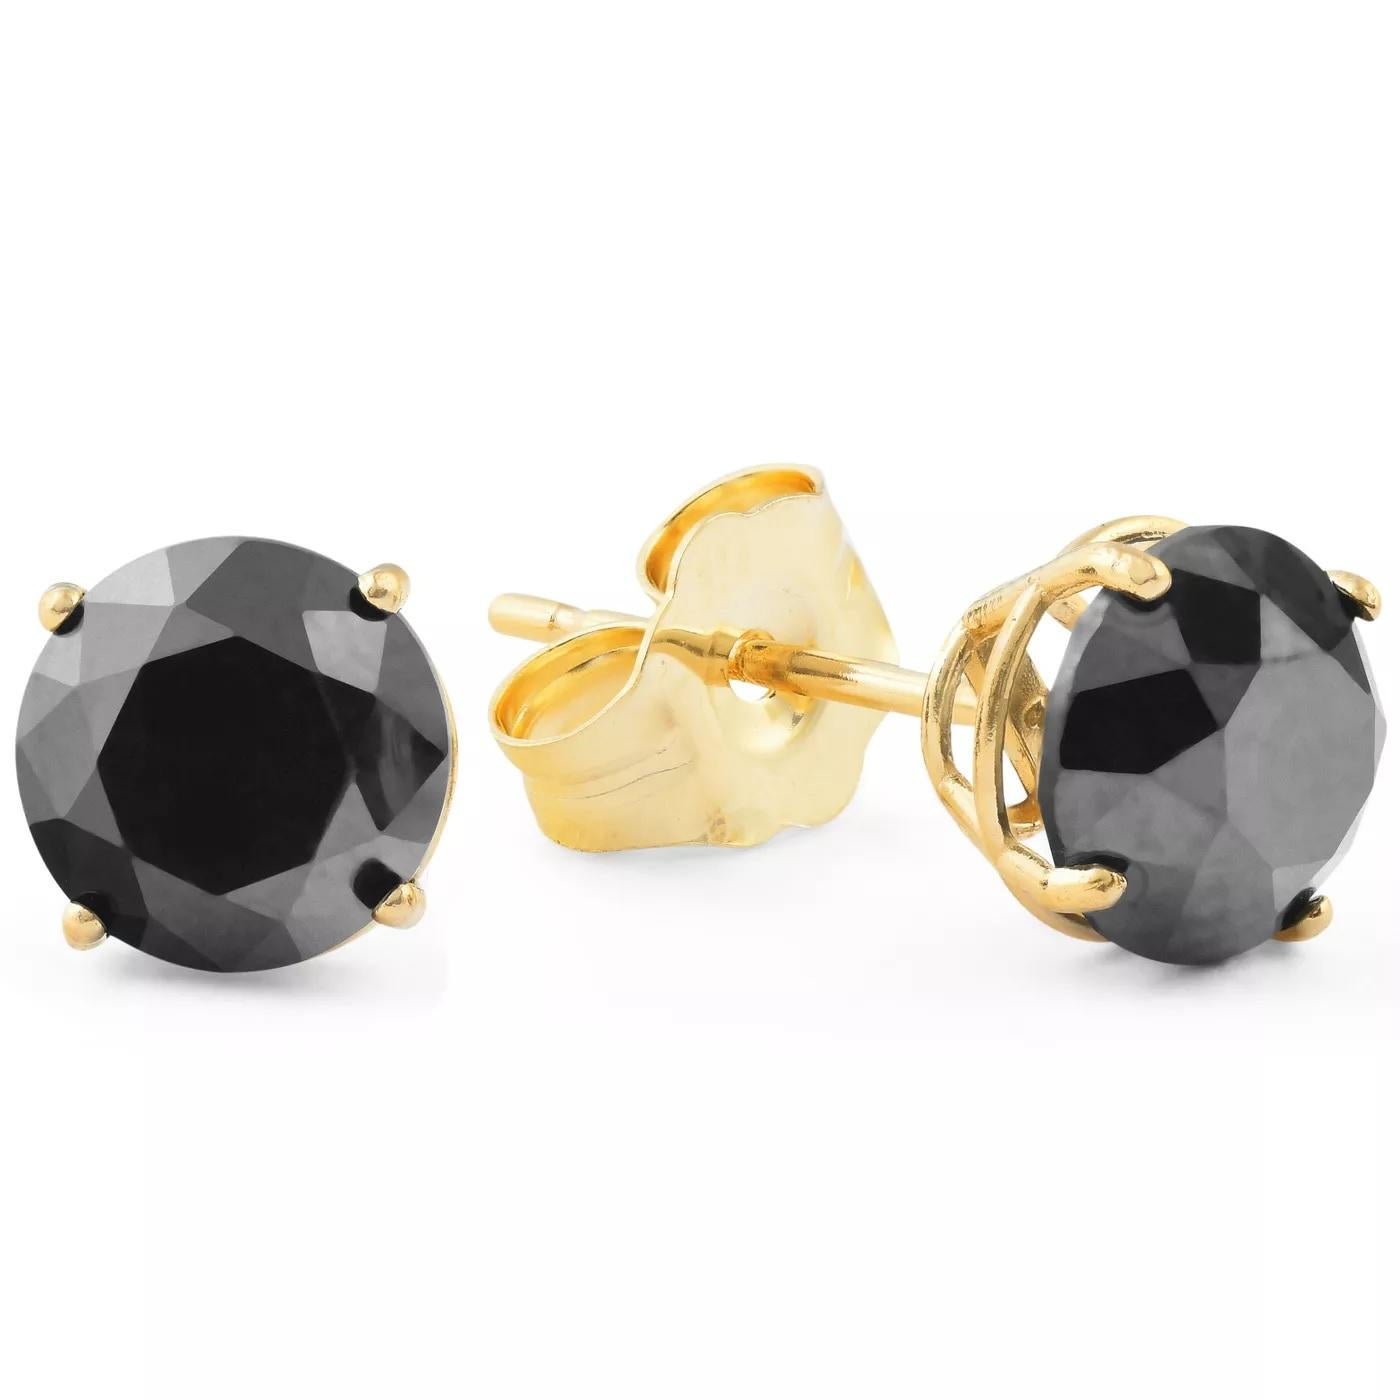 Alluring and refined, these diamond stud earrings are sure to be noticed. Created in 14 K yellow gold, the earring showcases a beguiling 1.56 carat natural black diamond solitaire measuring 6.90 x 6.95 x 4.80mm. Exquisitely made and Captivating with